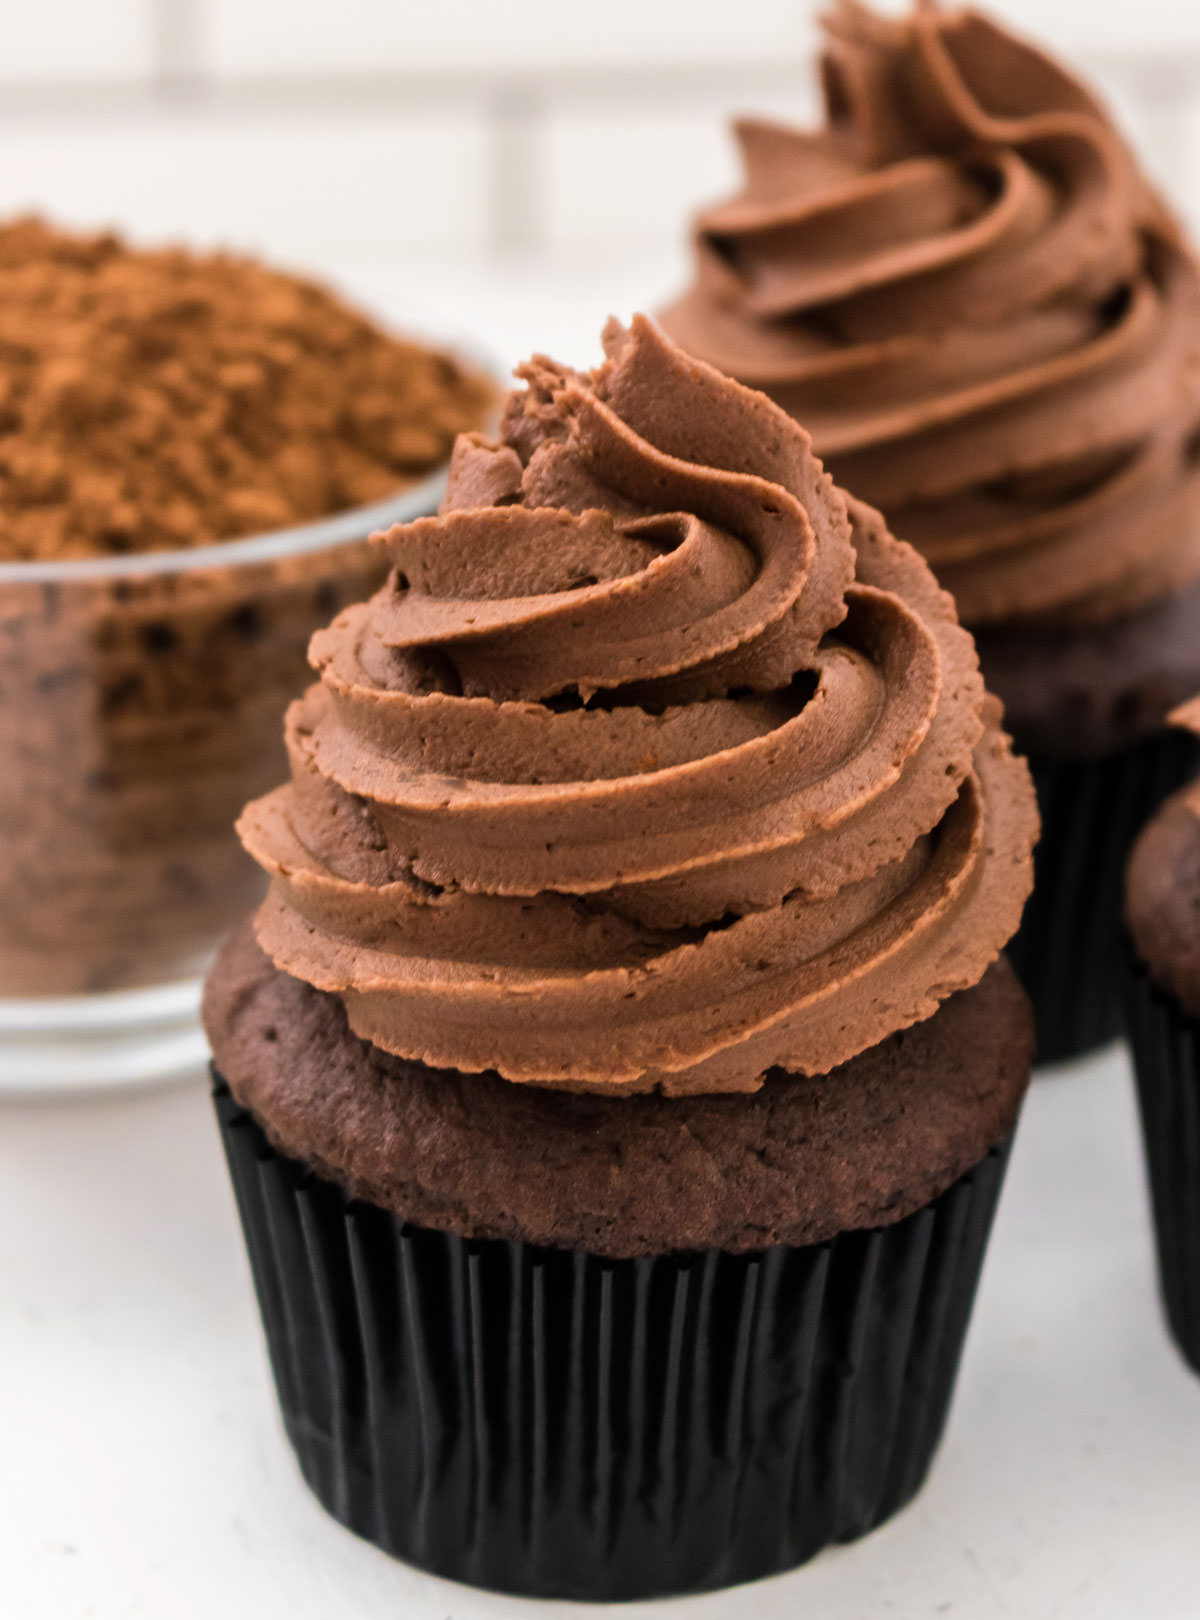 Closeup on a chocolate cupcake topped with The Best Chocolate Mint Buttercream Frosting sitting next to a glass bowl filled with cocoa powder.